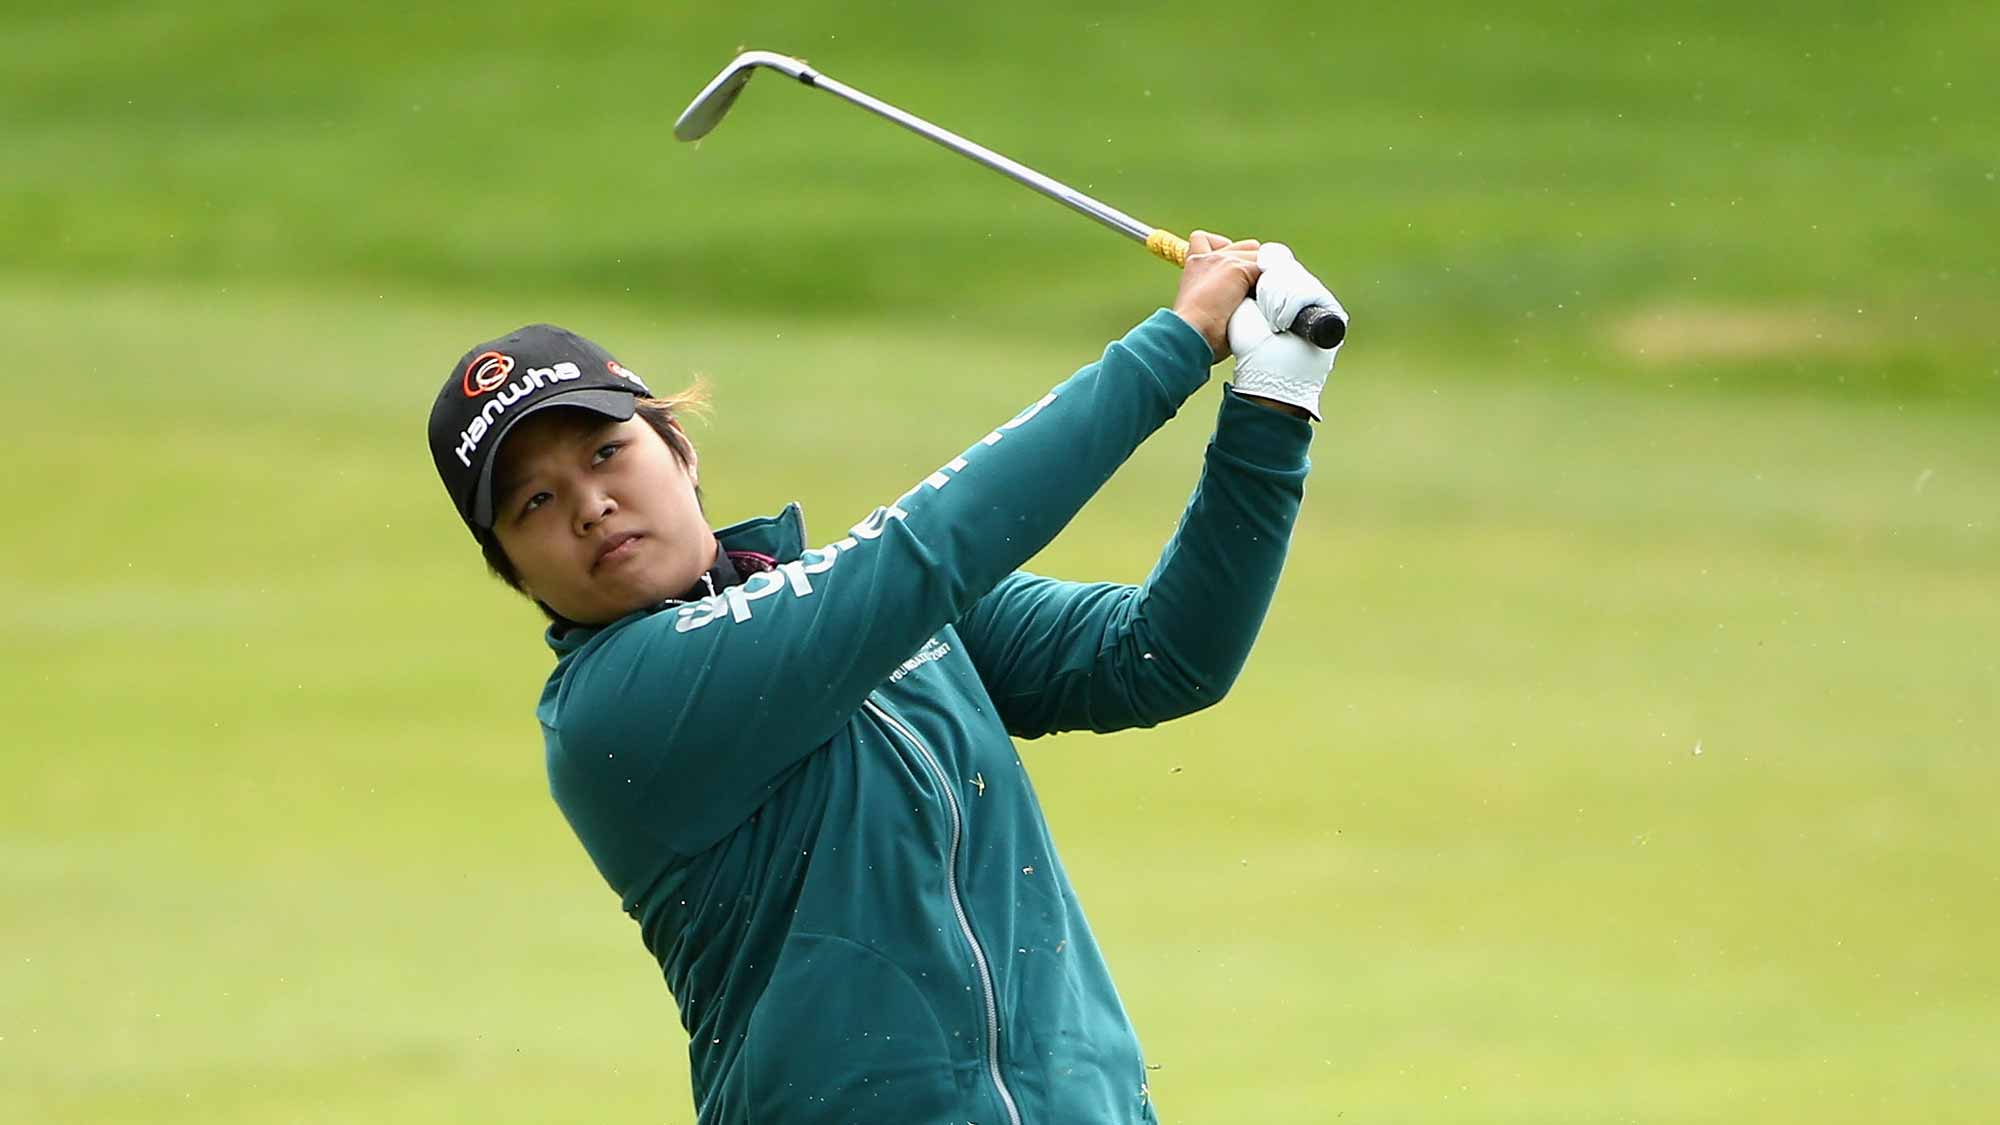 Haru Nomura of Japan hits her second shot on the second hole during round two of the Swinging Skirts LPGA Classic at Lake Merced Golf Club